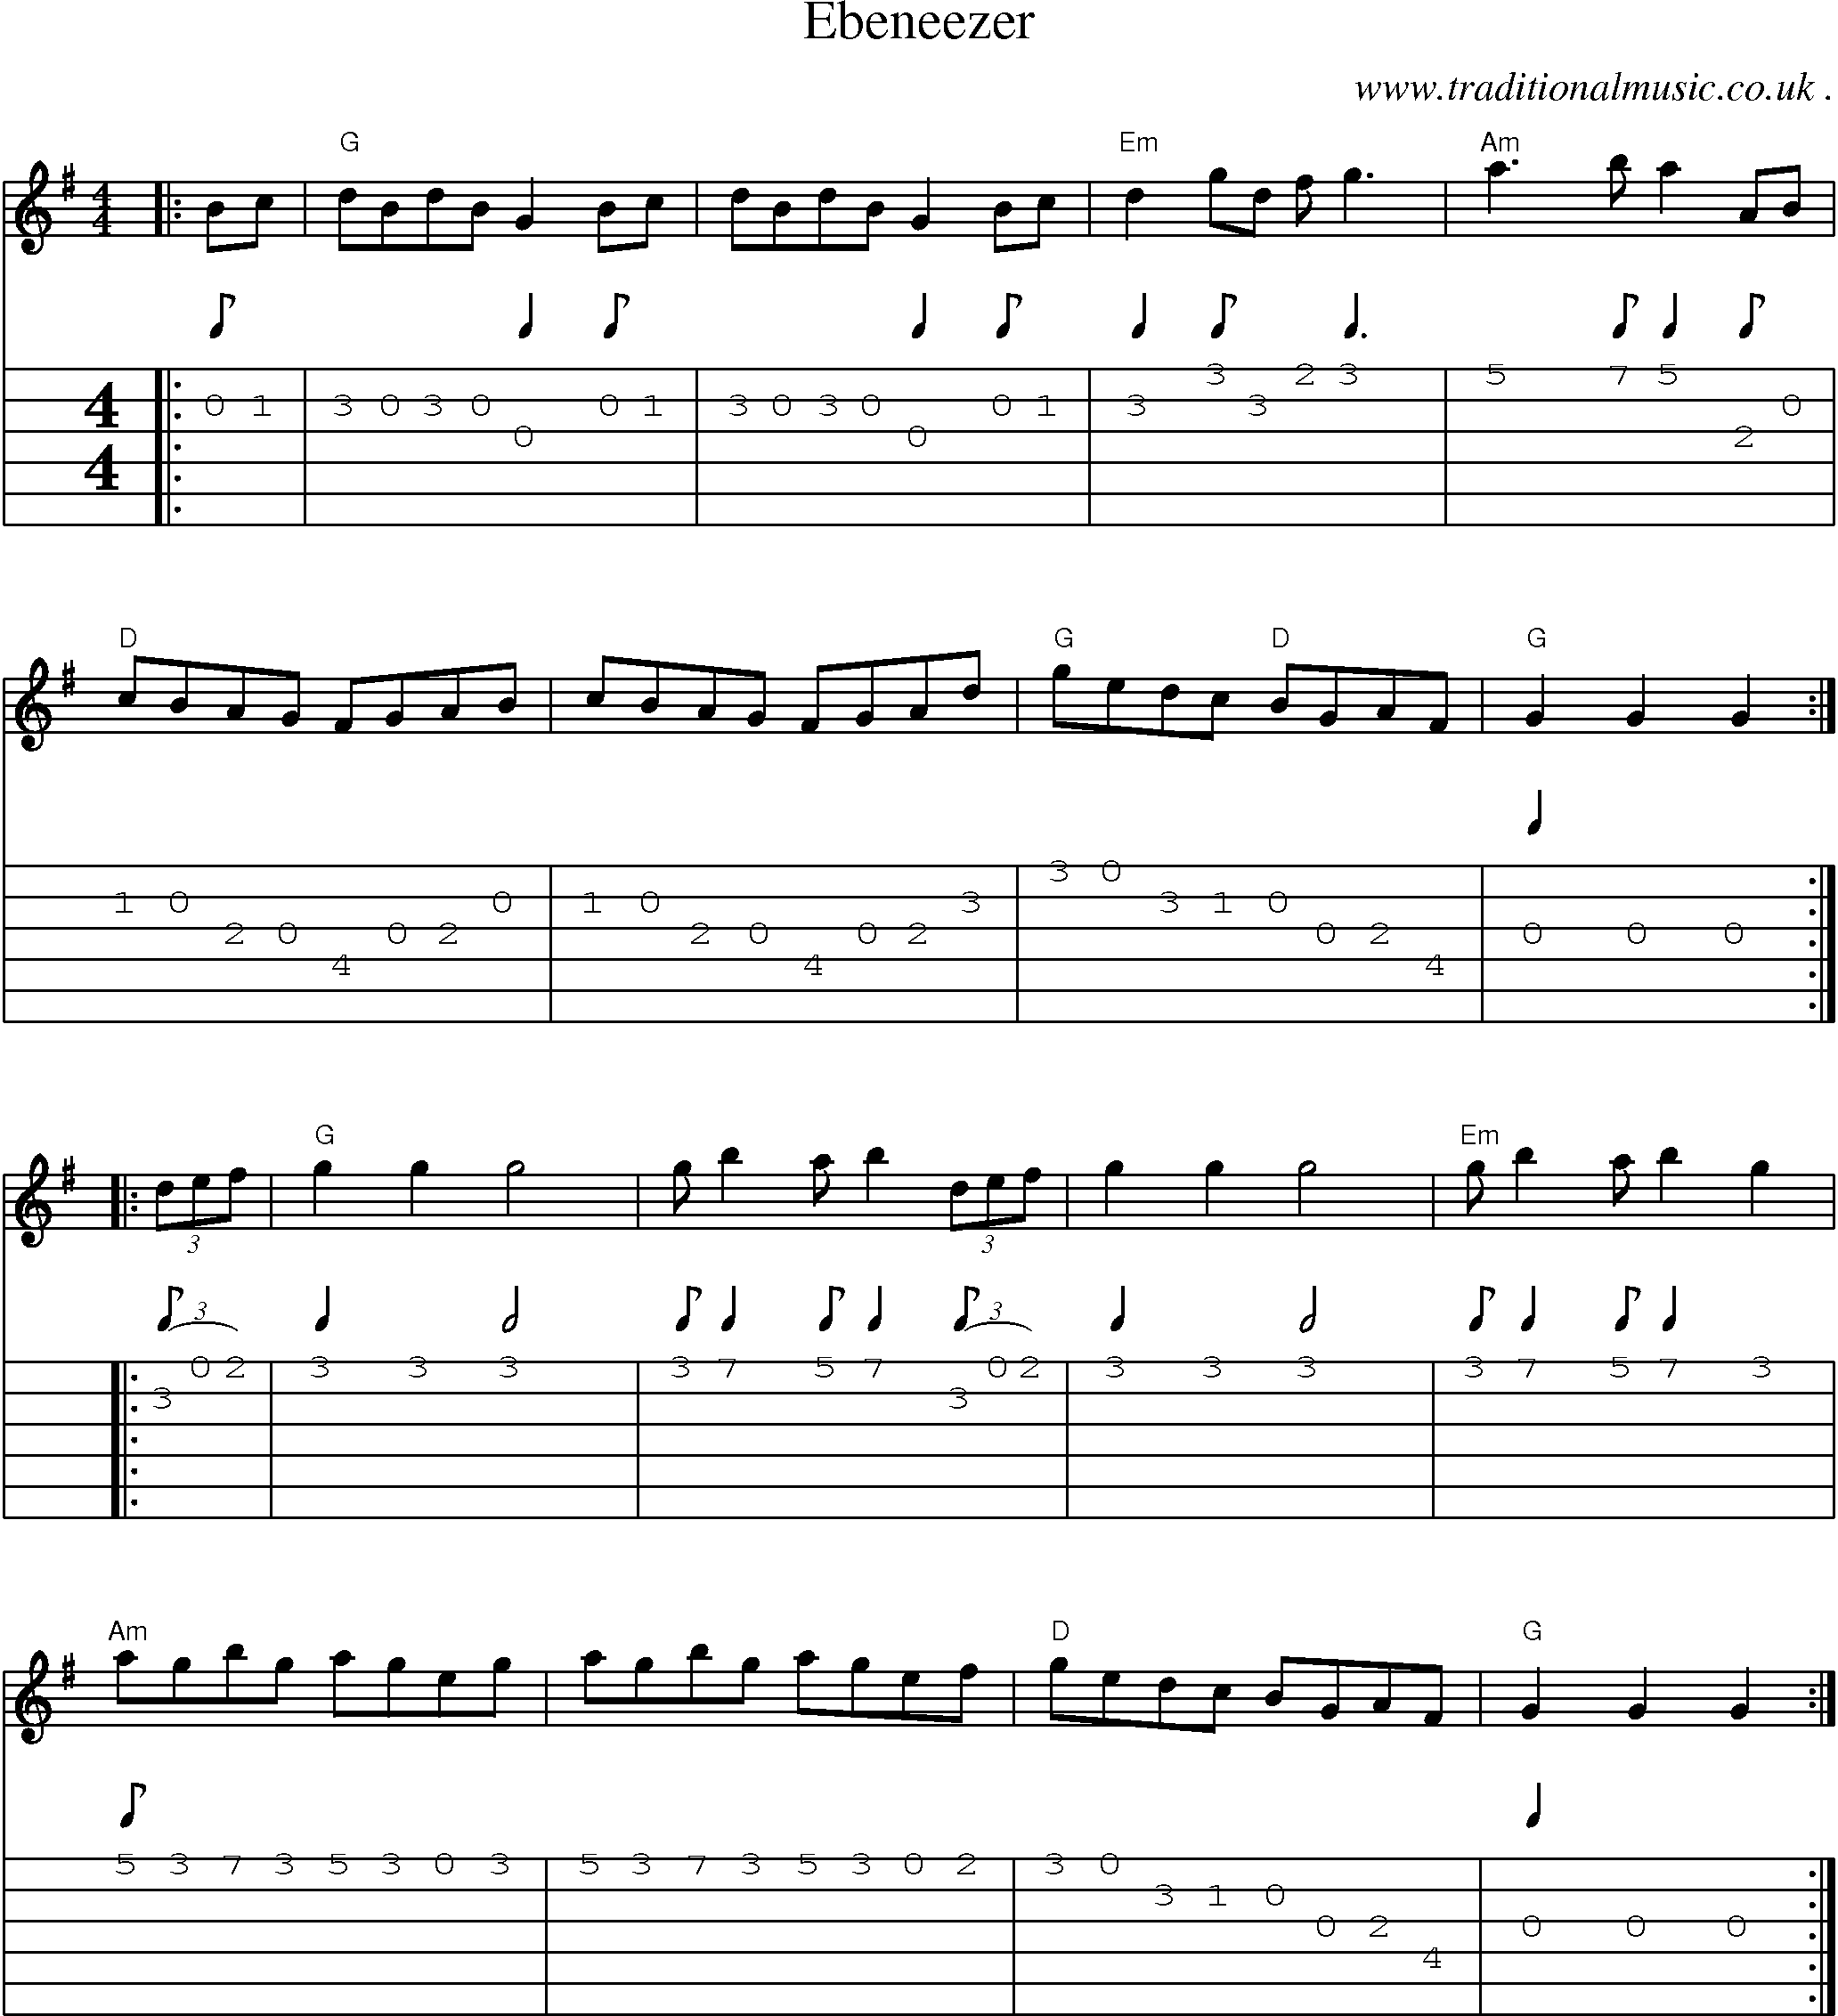 Music Score and Guitar Tabs for Ebeneezer